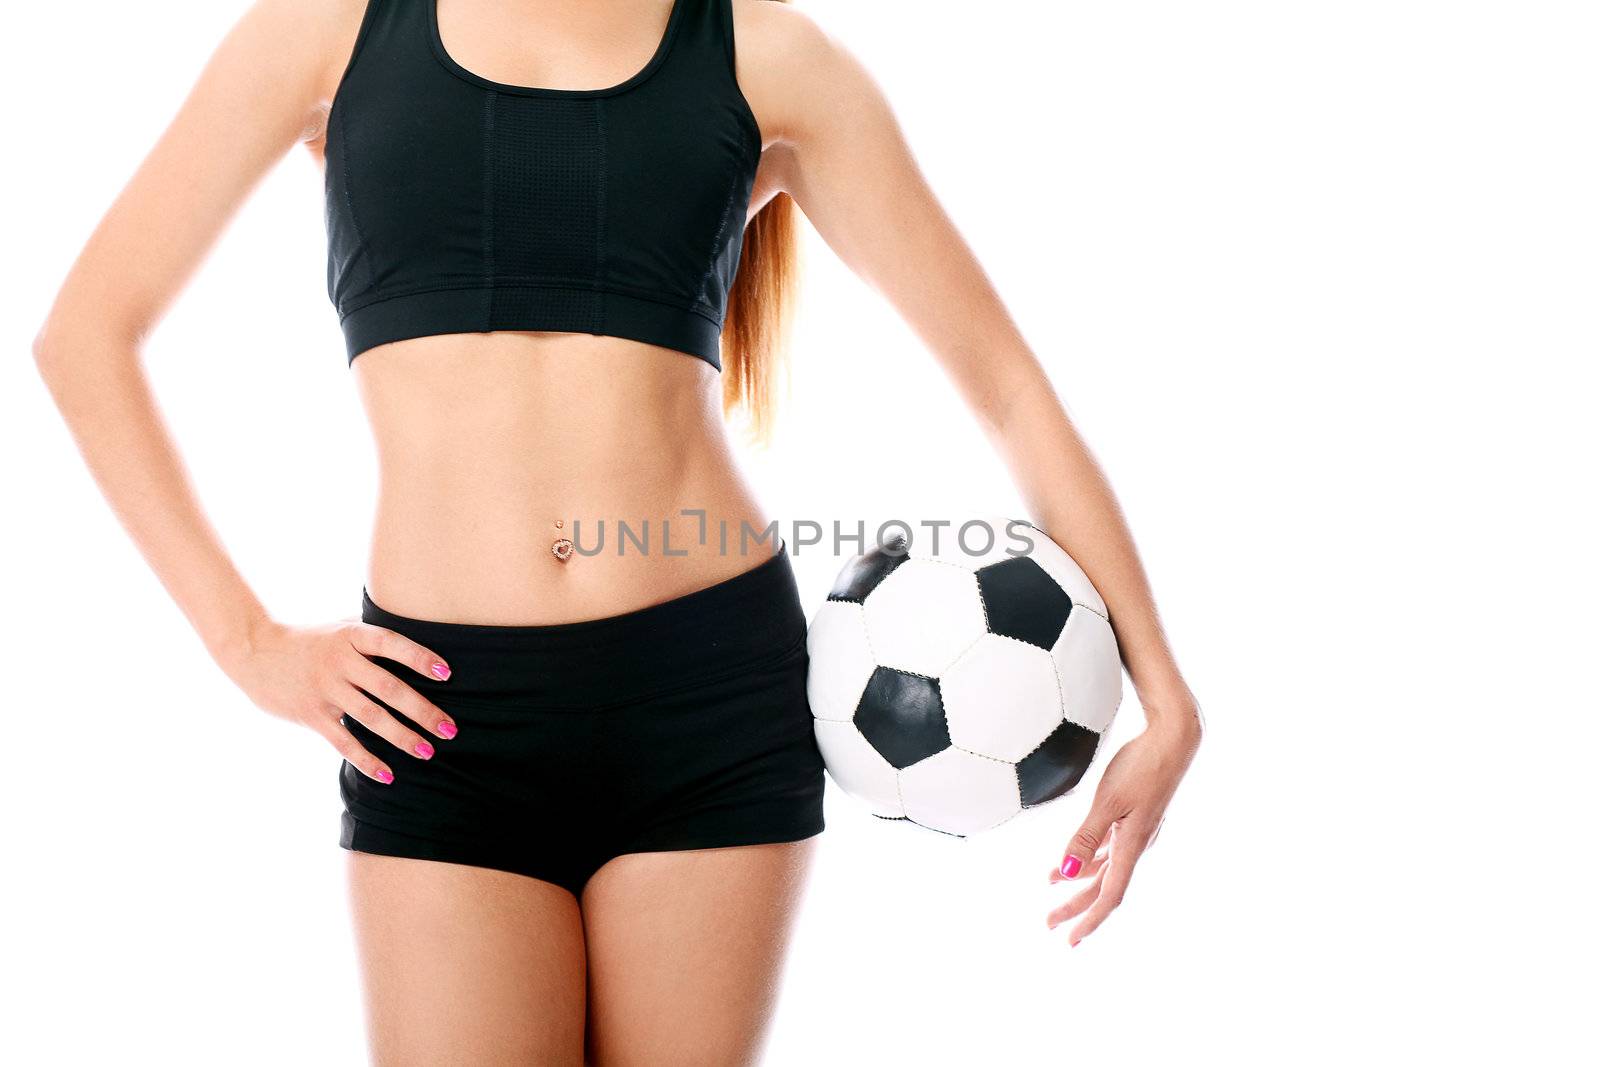 Young and sexy girl`s body with soccer ball over white background